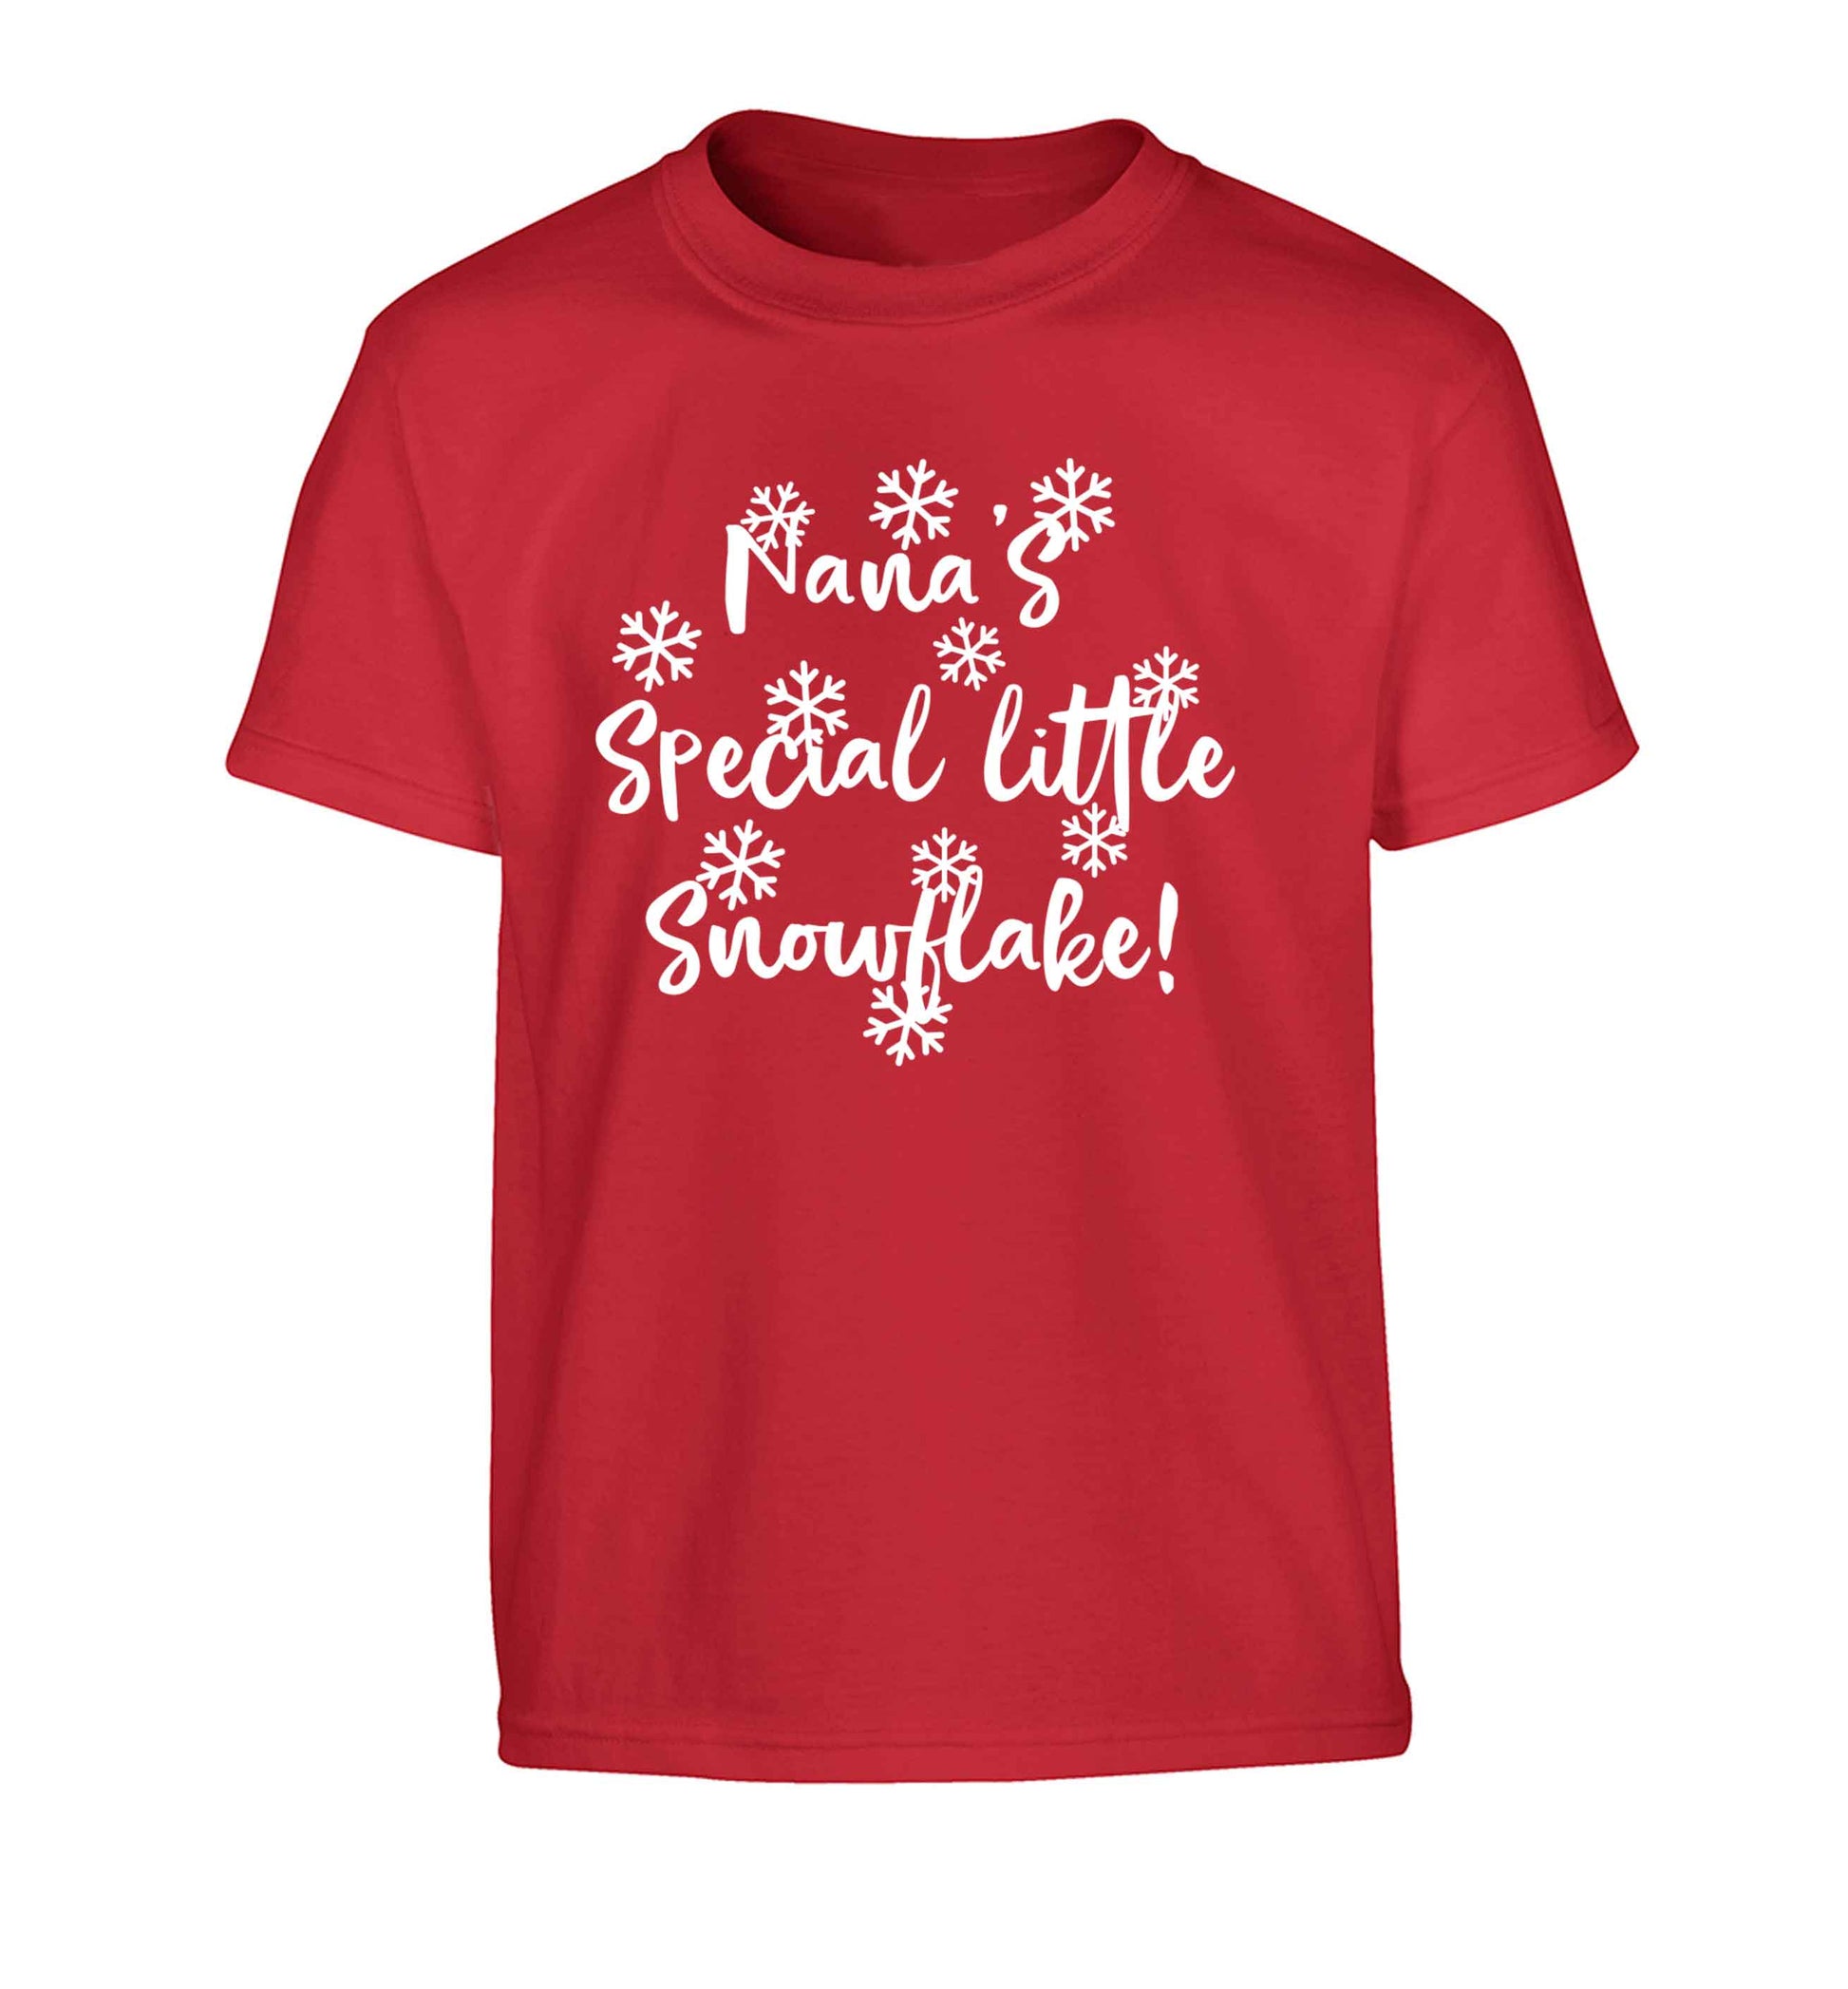 Nana's special little snowflake Children's red Tshirt 12-13 Years